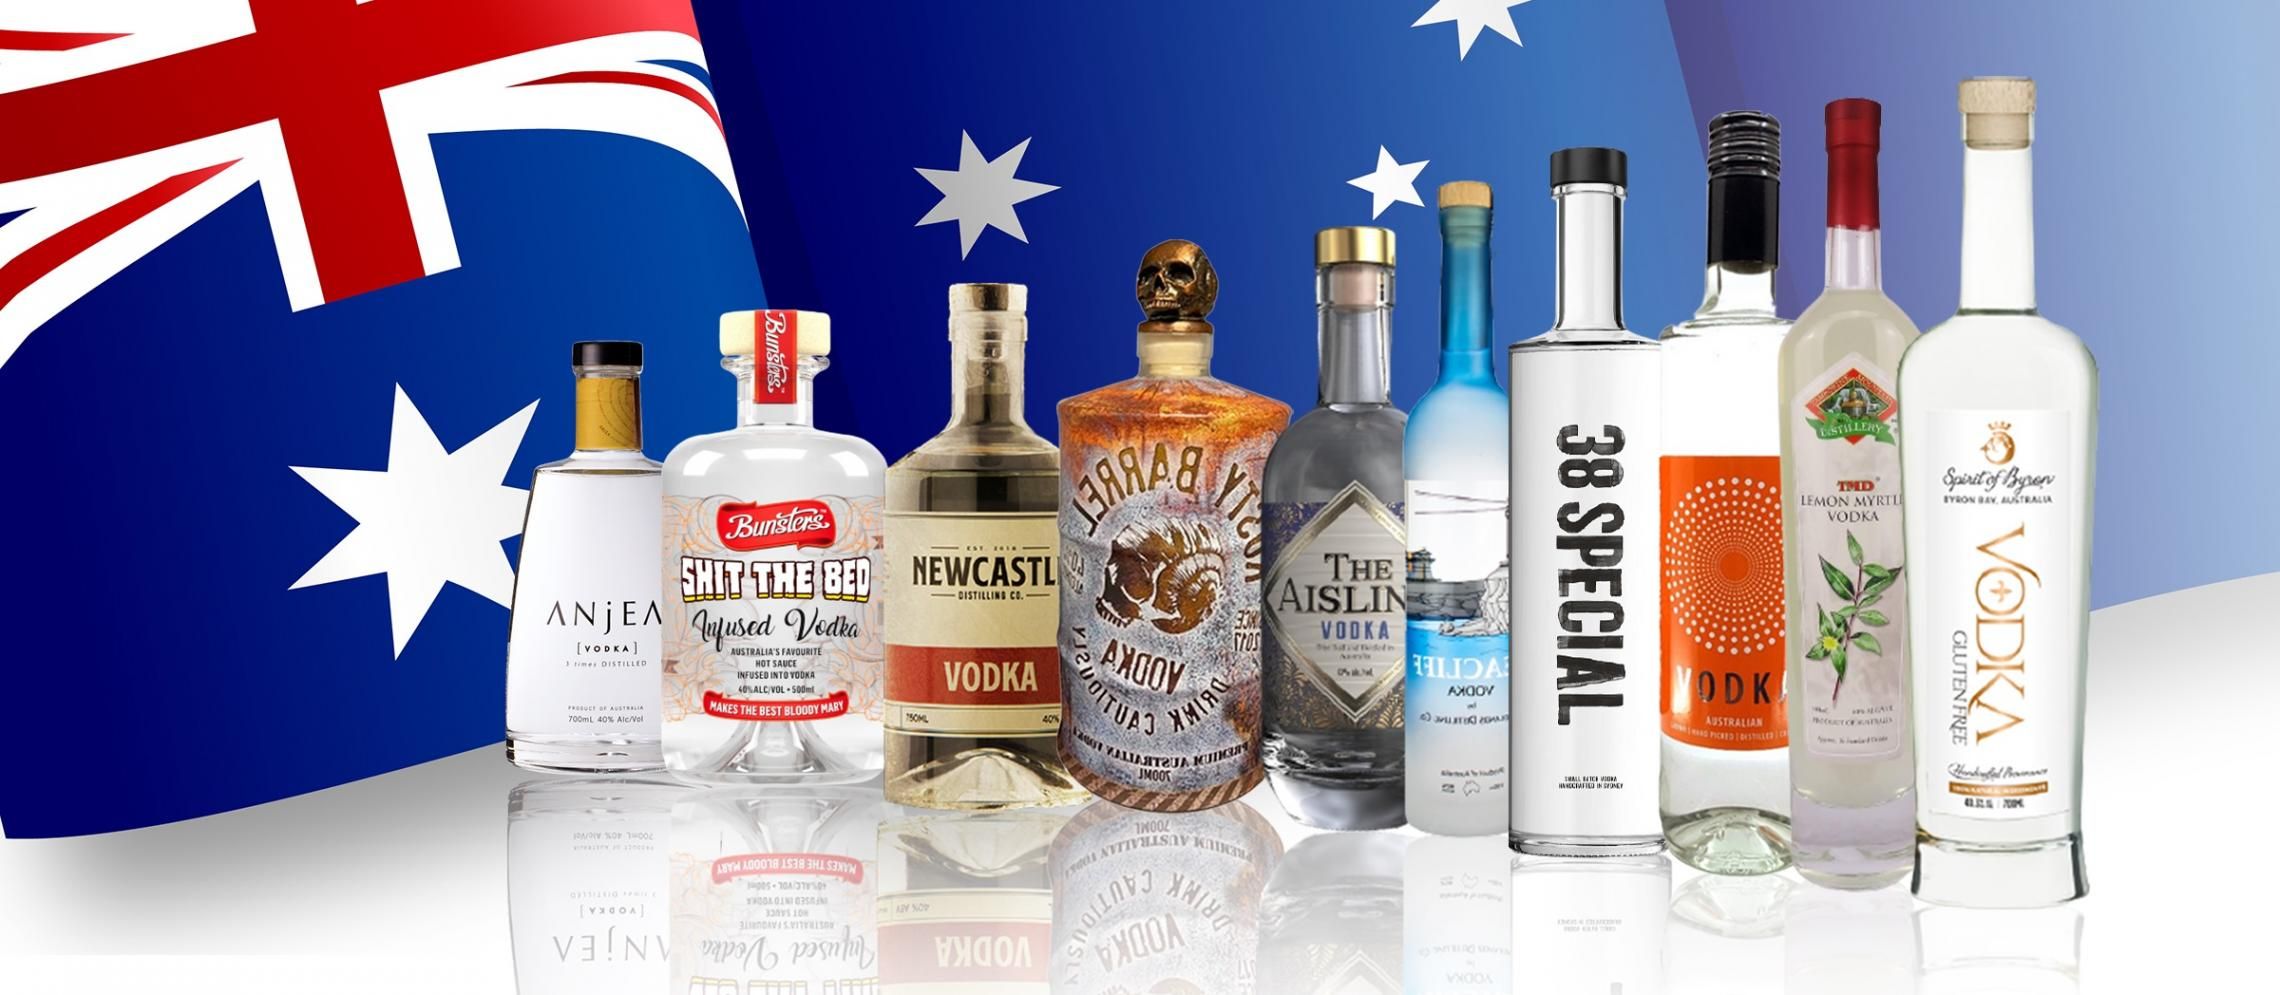 Photo for: 10 Aussie Vodkas To Have When Life Gives You Lemons